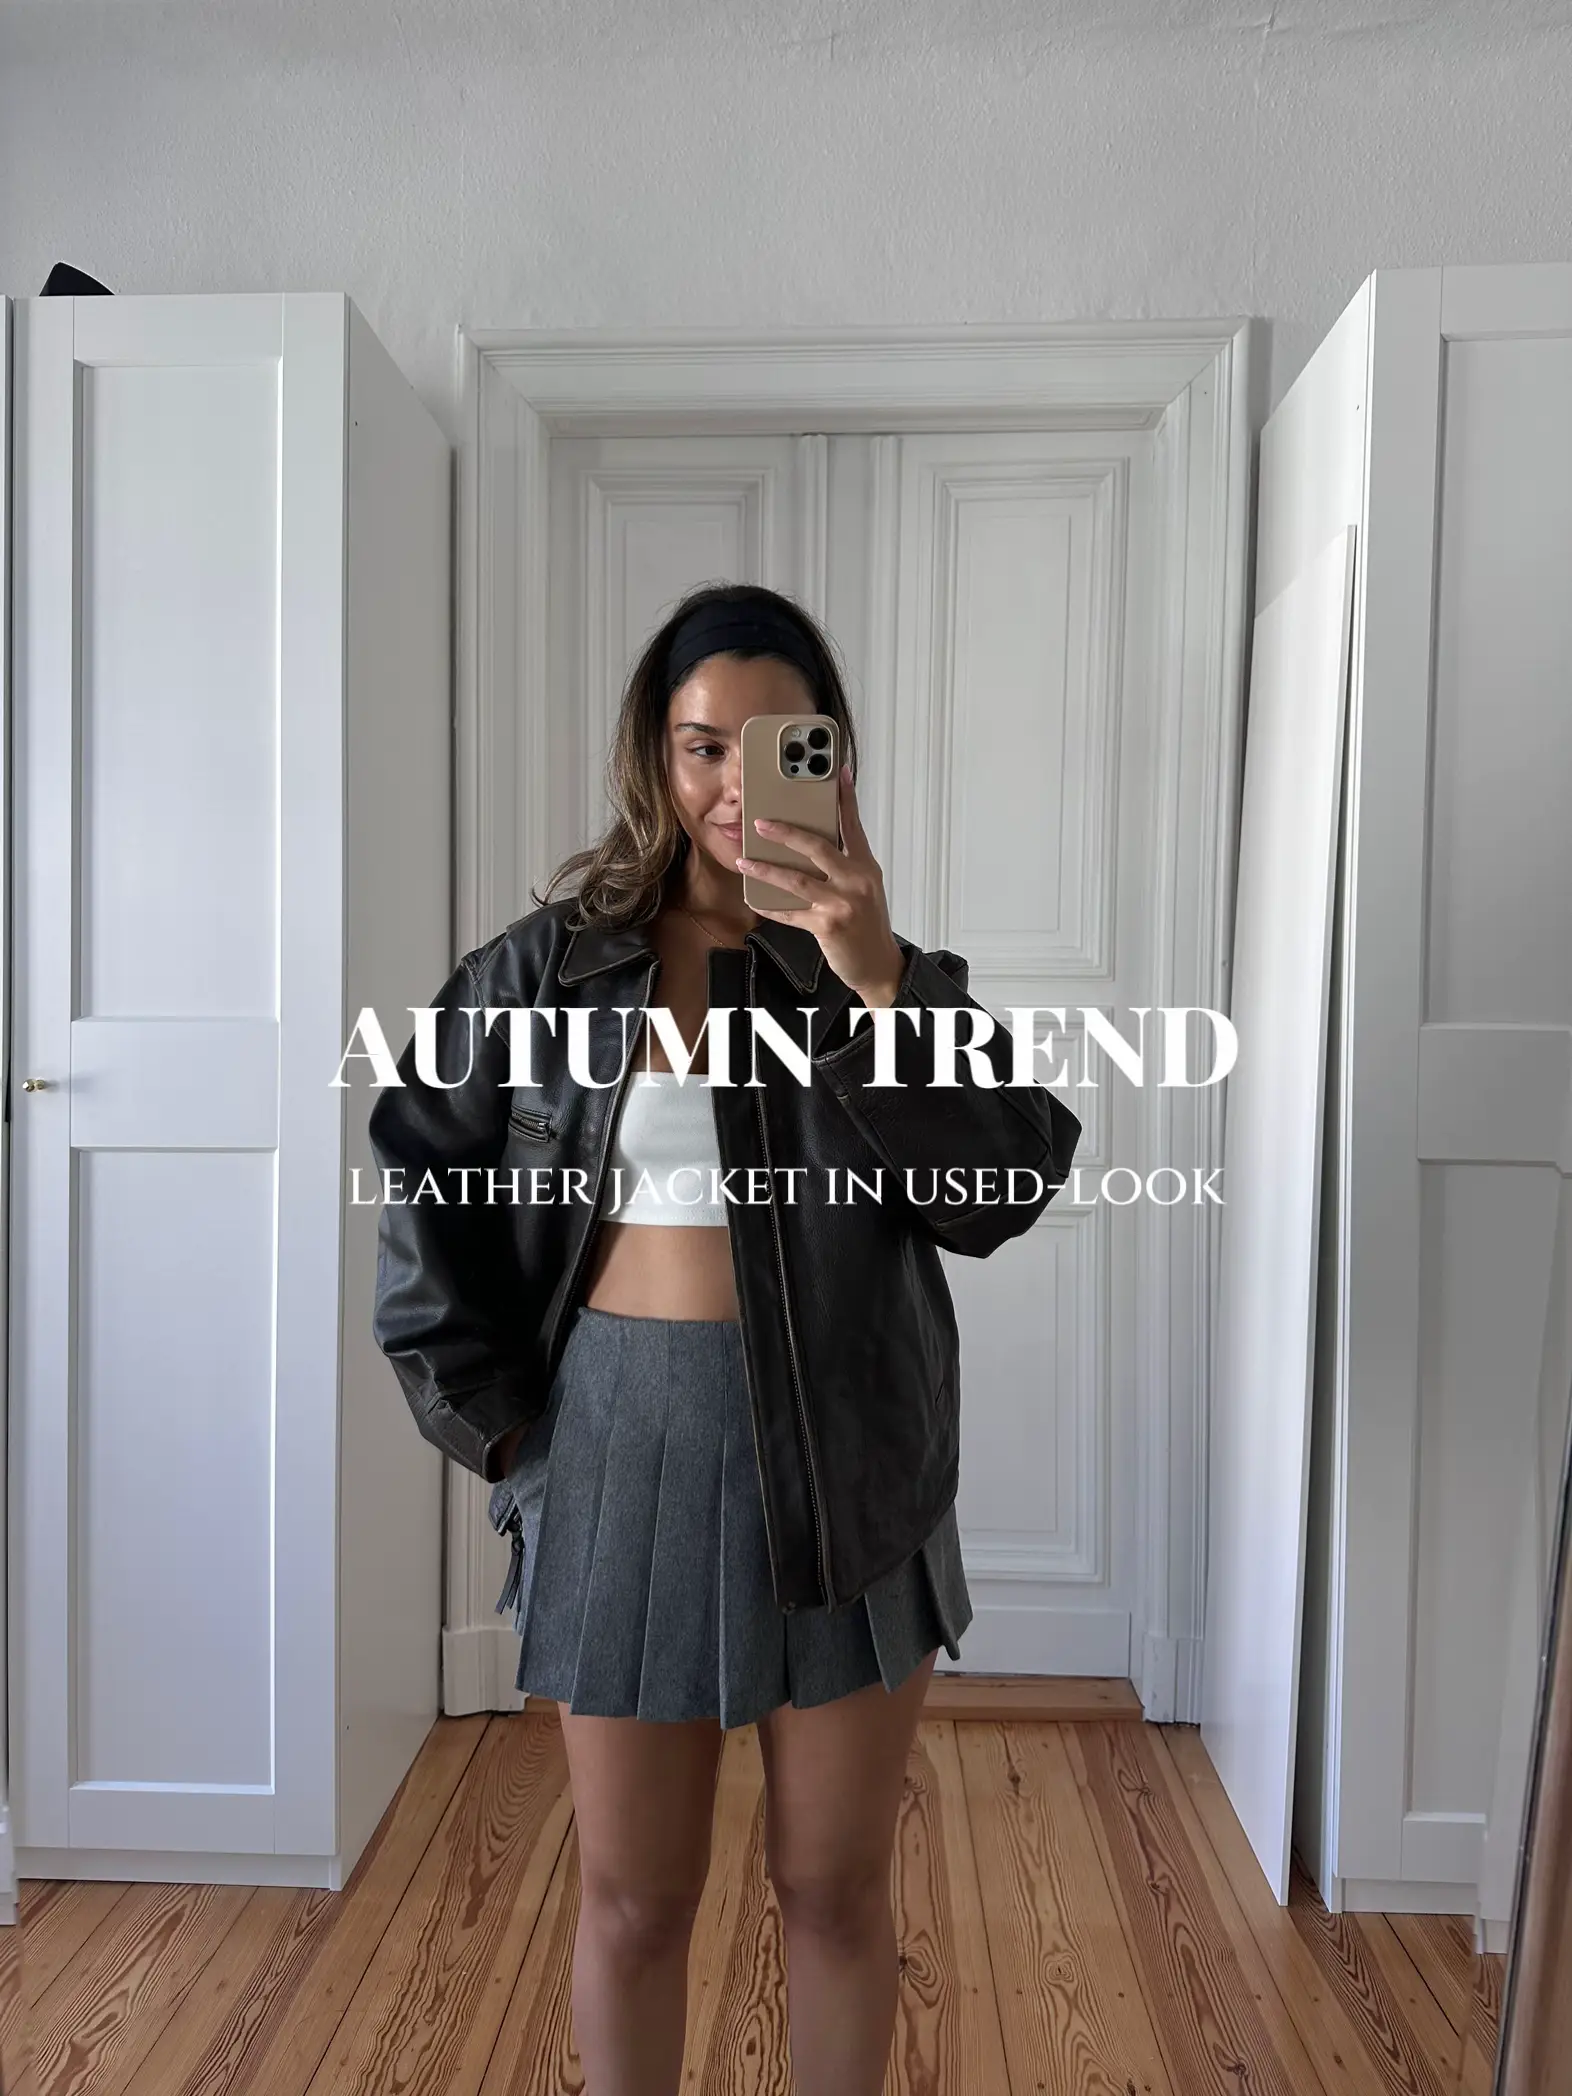 Autumn Trend - Leather jacket | Bella Lemon8 Emar Gallery | by posted